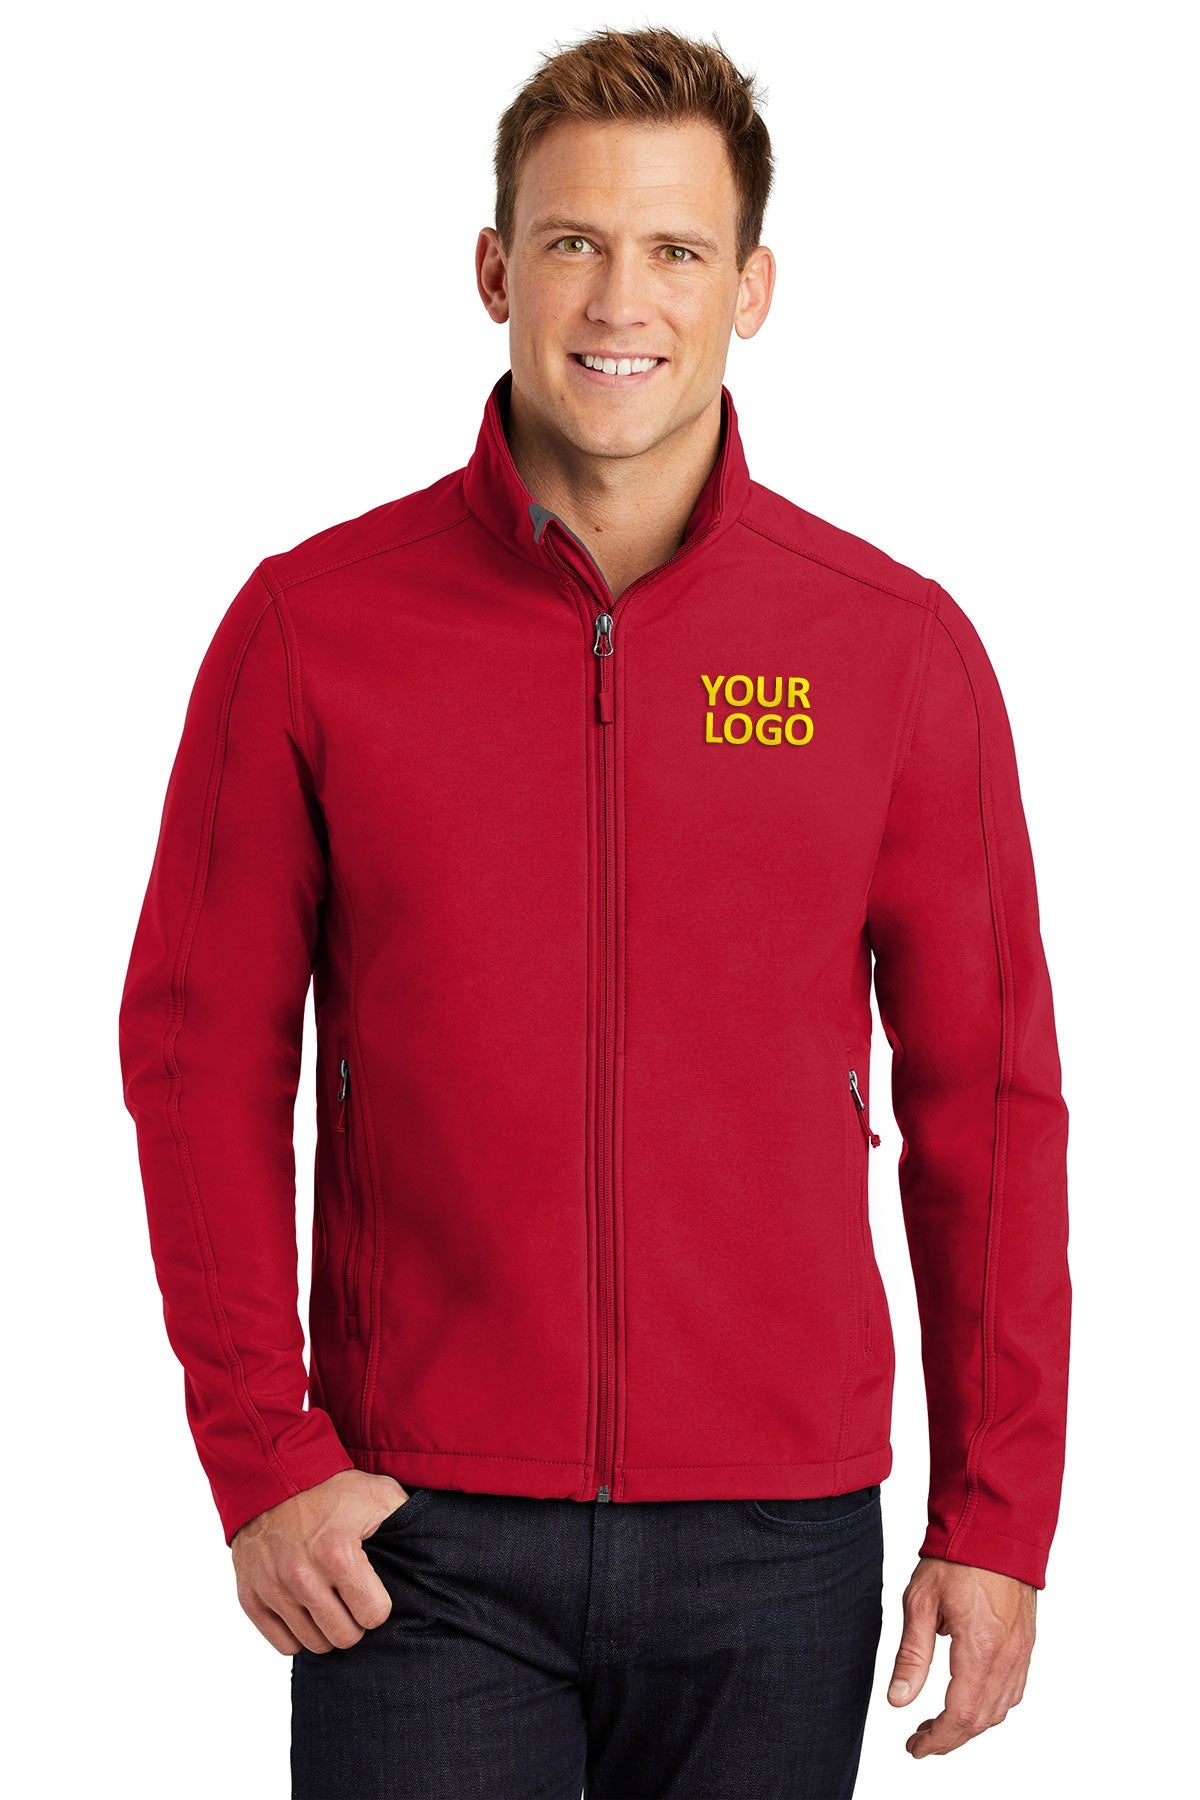 port authority rich red j317 custom jackets with logo